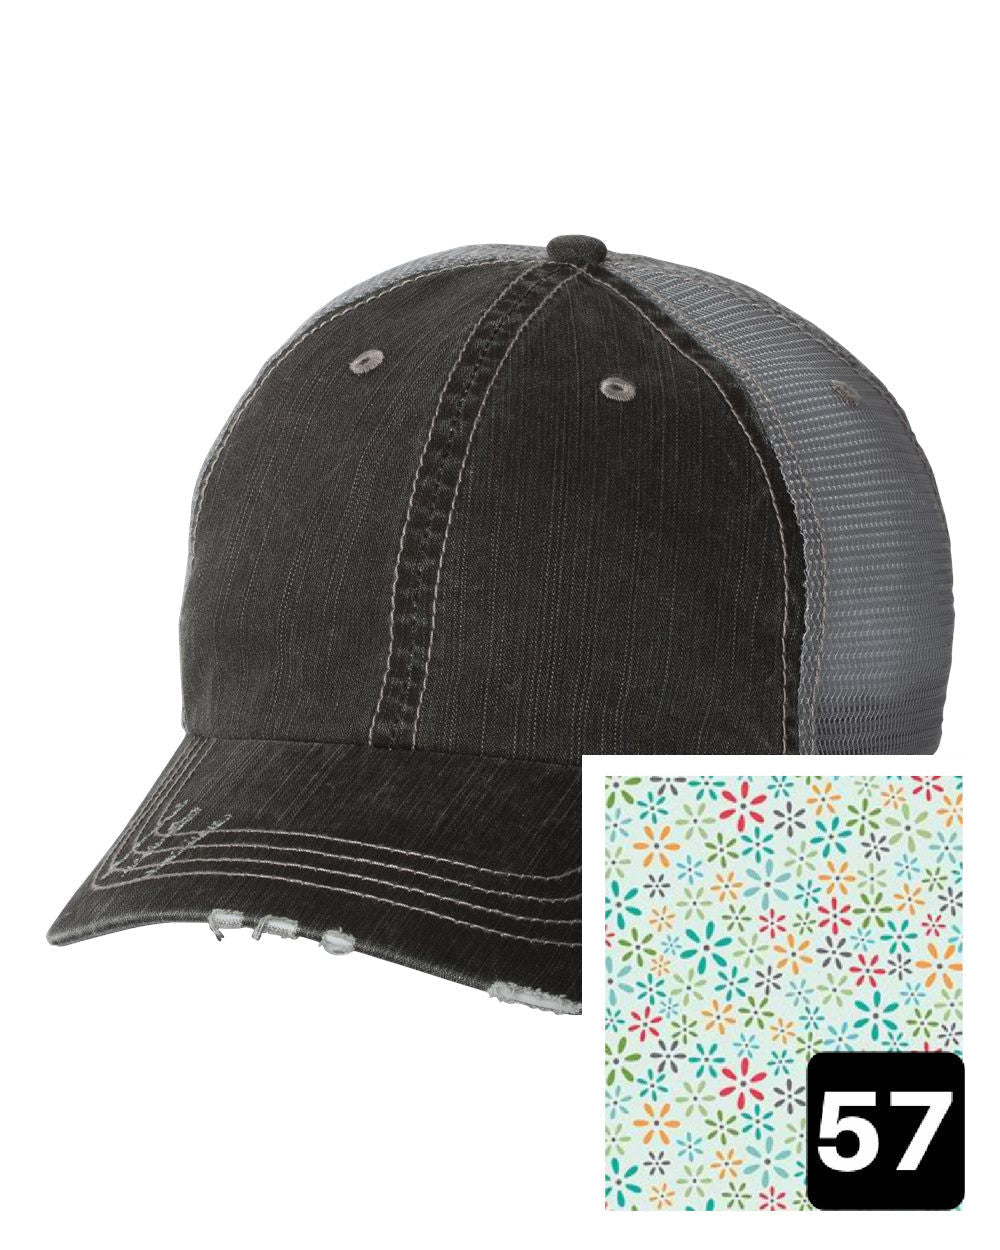 gray distressed trucker hat with white daisy on yellow fabric state of Mississippi